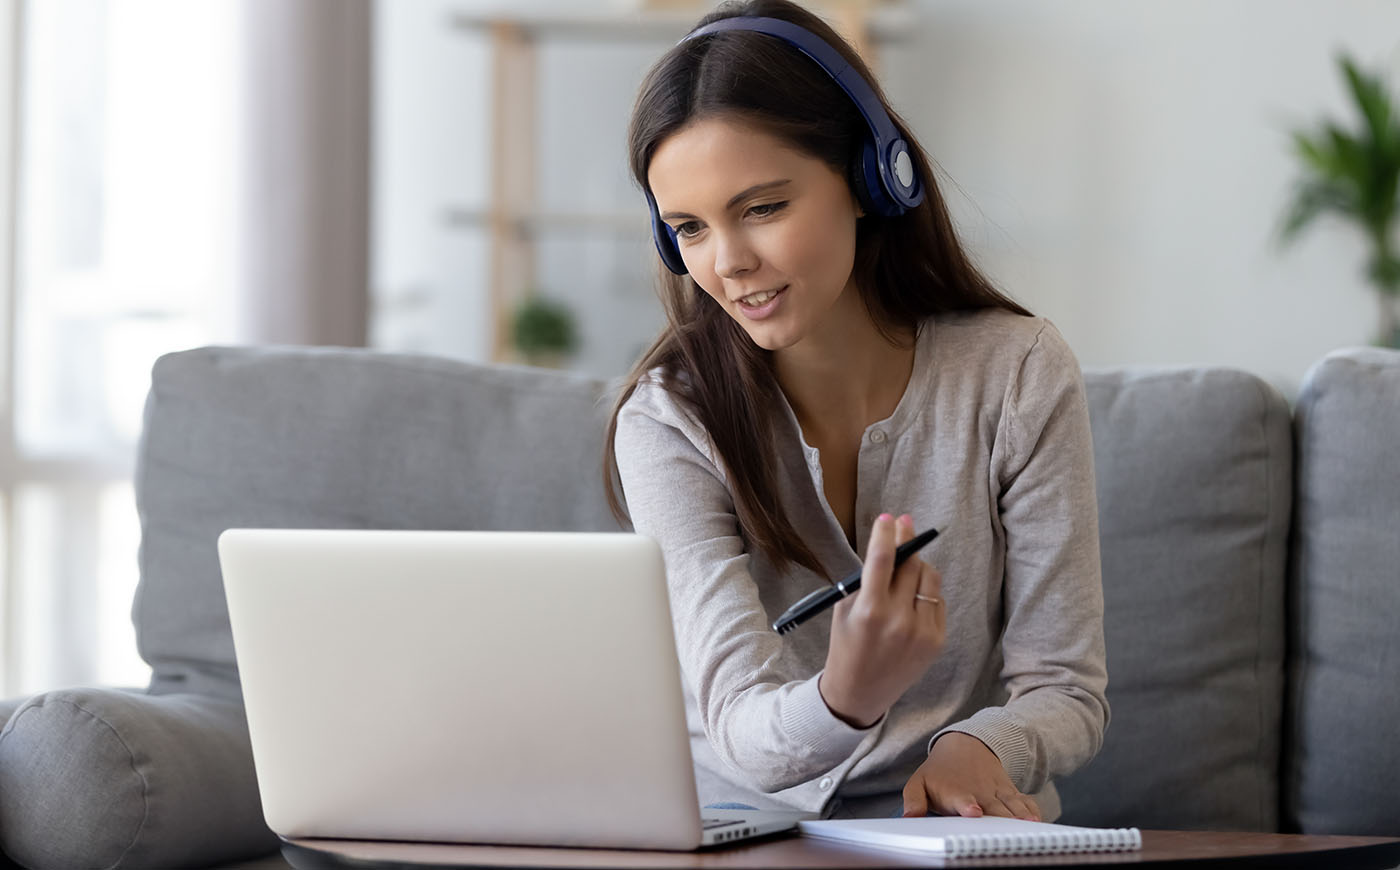 Young woman in headphones speaking looking at laptop making notes